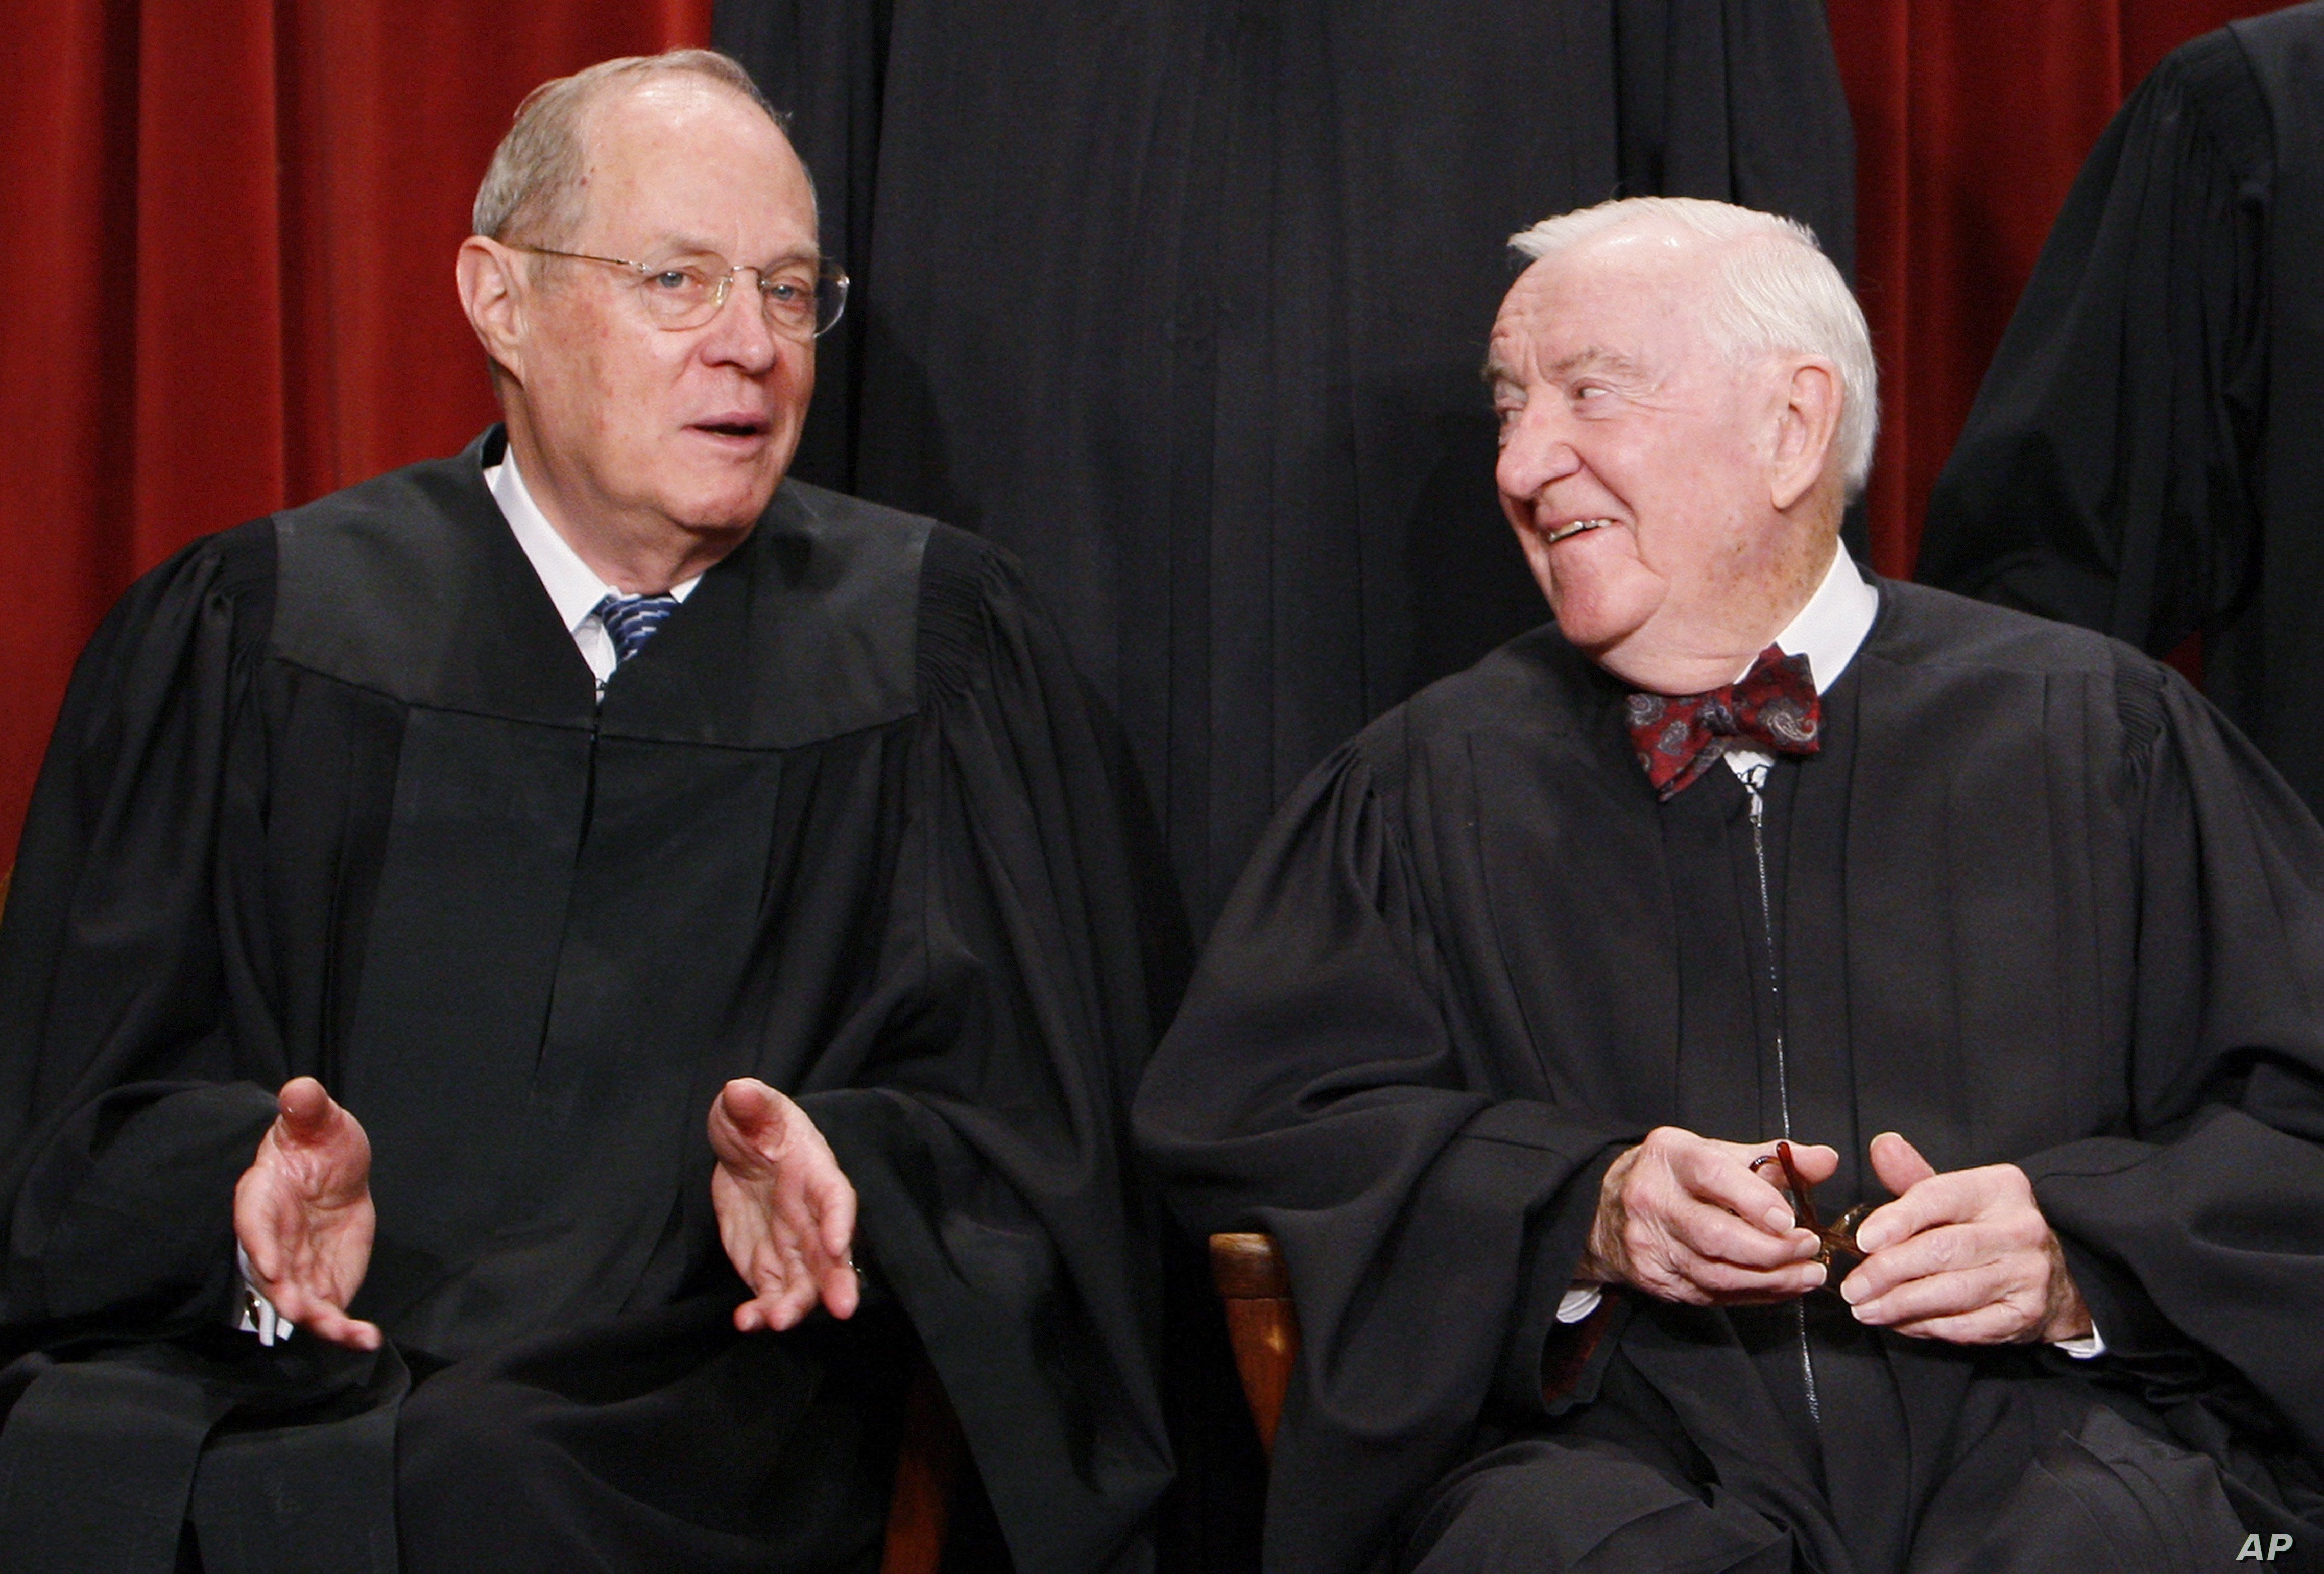 Associate Justices Anthony Kennedy, left, and John Paul Stevens talk to each other as they sit for a new group photograph with other Supreme Court judges, Tuesday, Sept. 29, 2009, at the Supreme Court in Washington. 